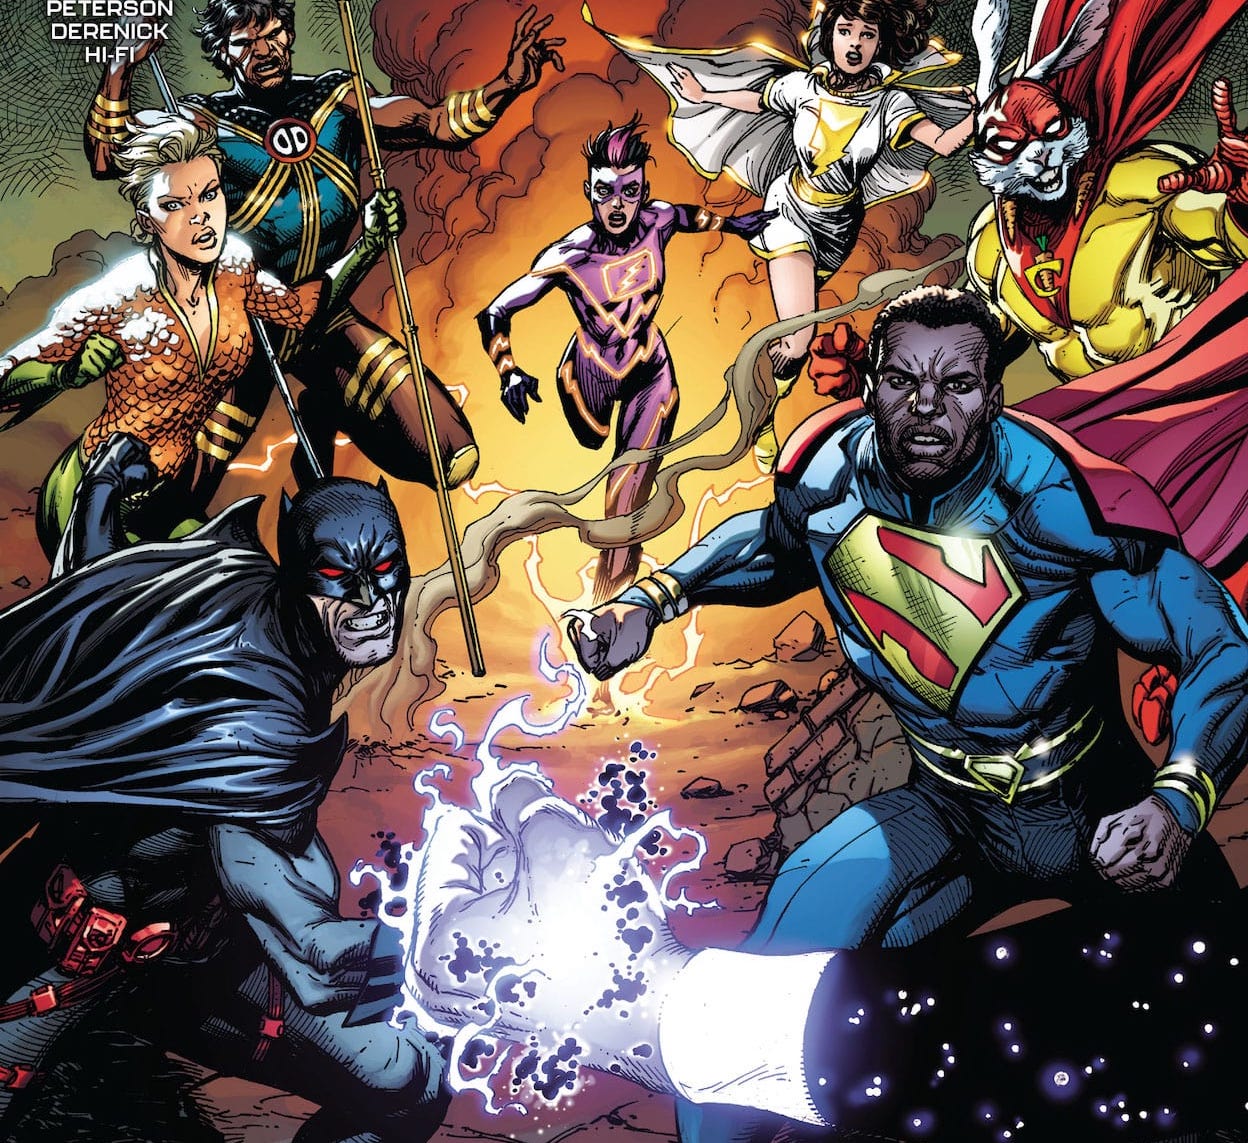 'Justice League Incarnate' #1 is big, bright, and epic